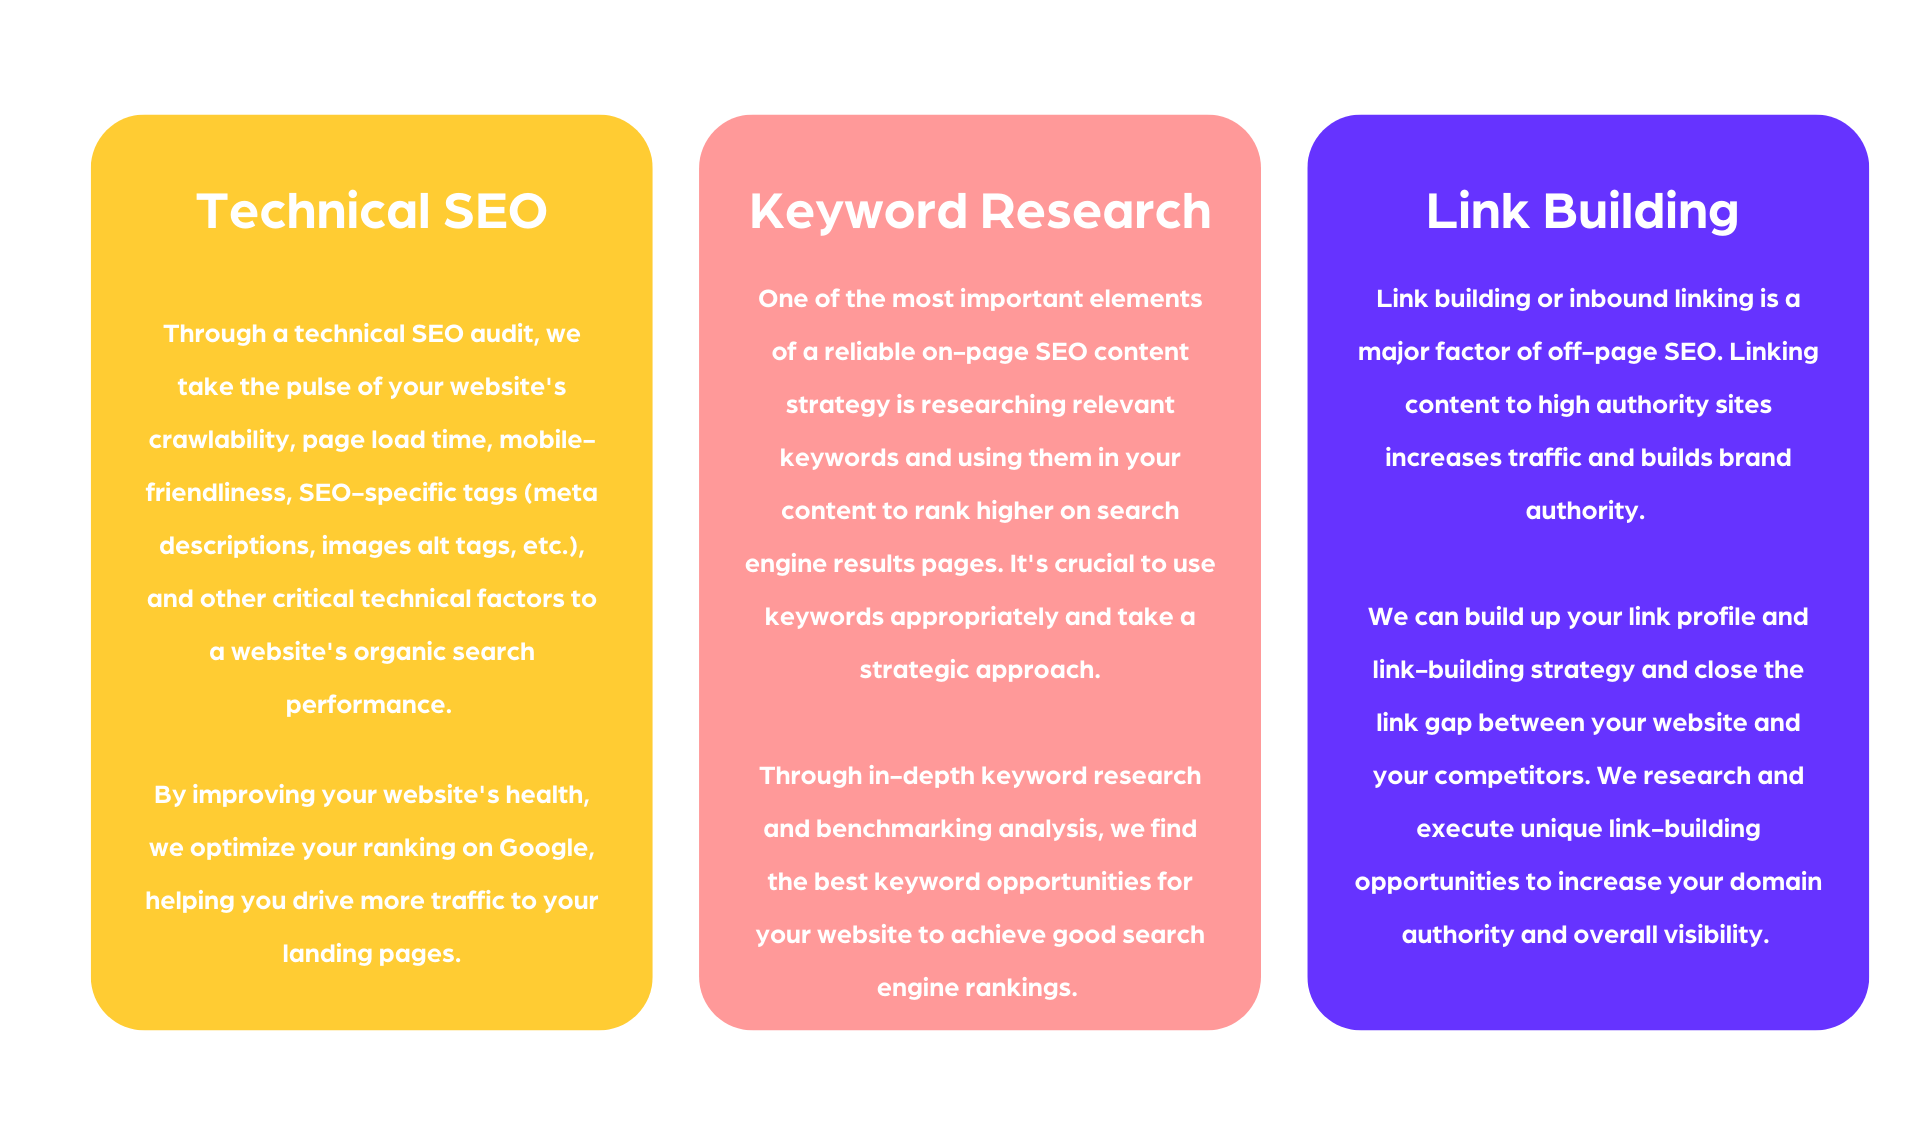 SEO Content Strategy pillars: Technical SEO, Keyword research and Link building